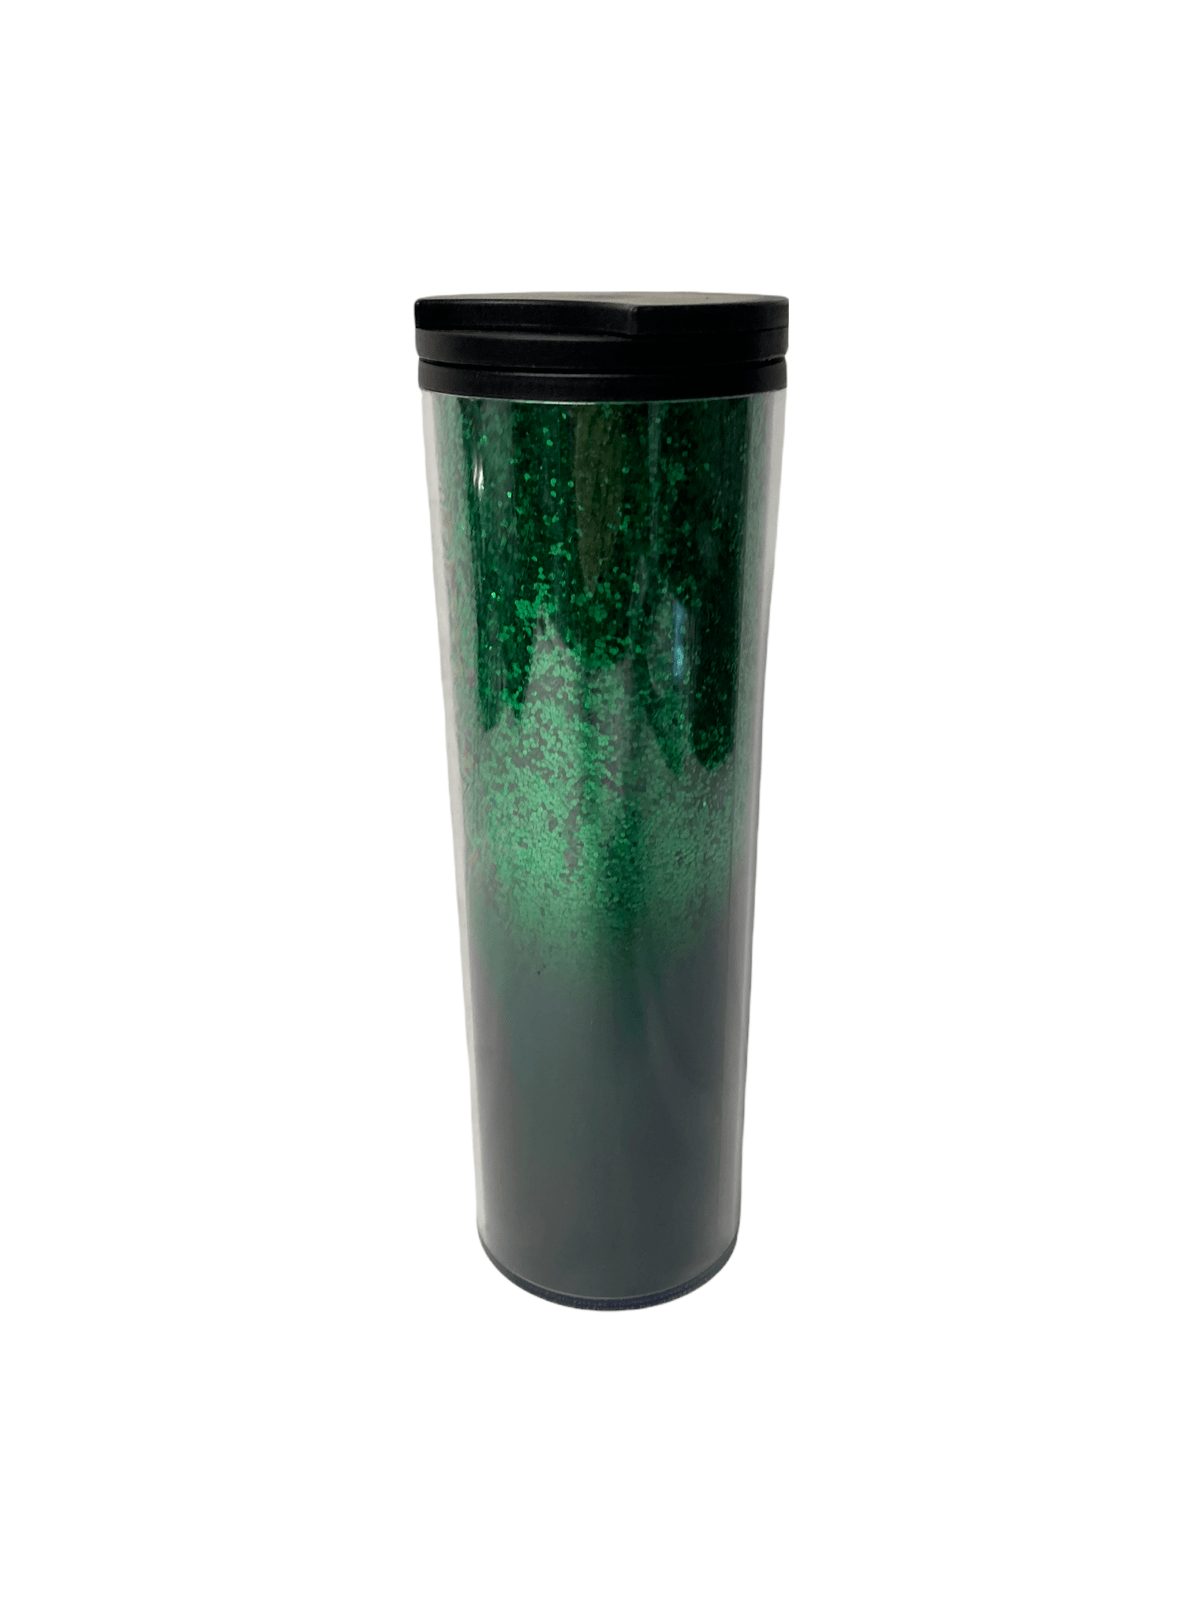 Starbucks 2019 Holiday Hot & Cold Cup 16 oz Green Sparkle Glitter Tumbler NEW 